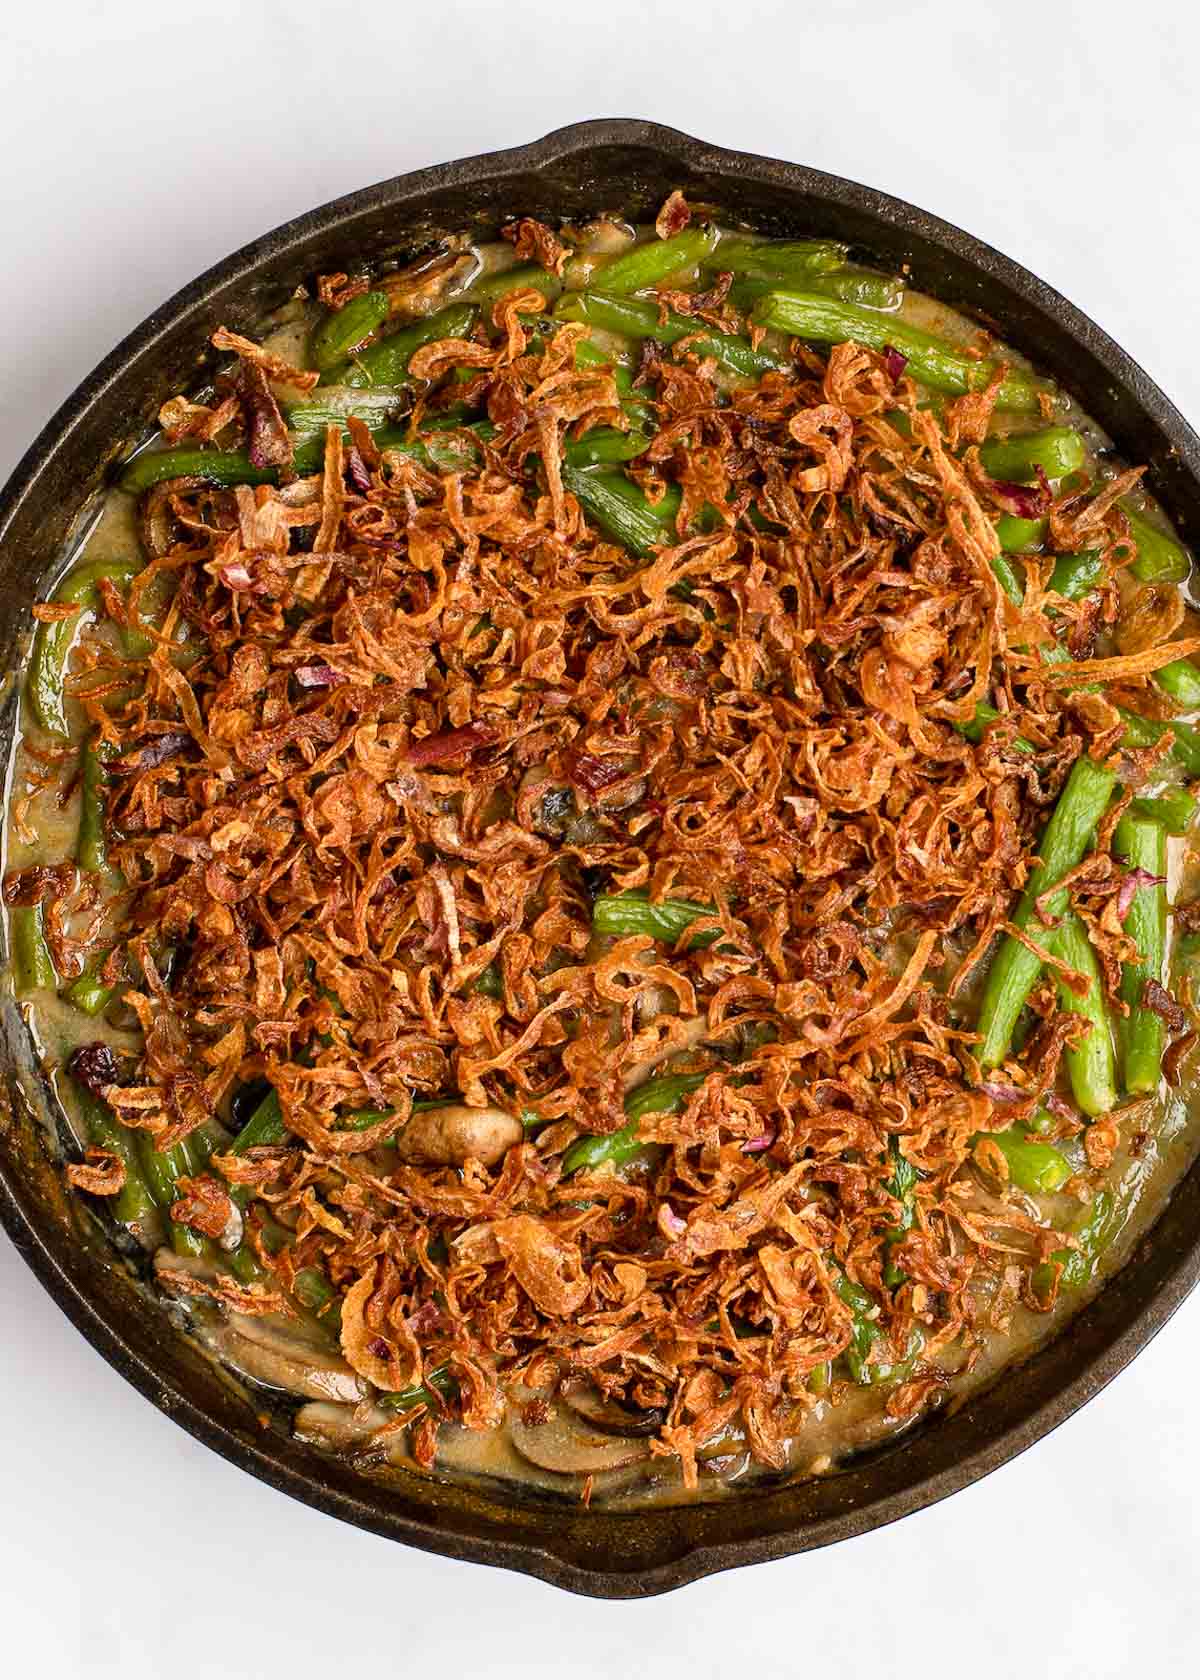 green bean casserole with fried onions in skillet